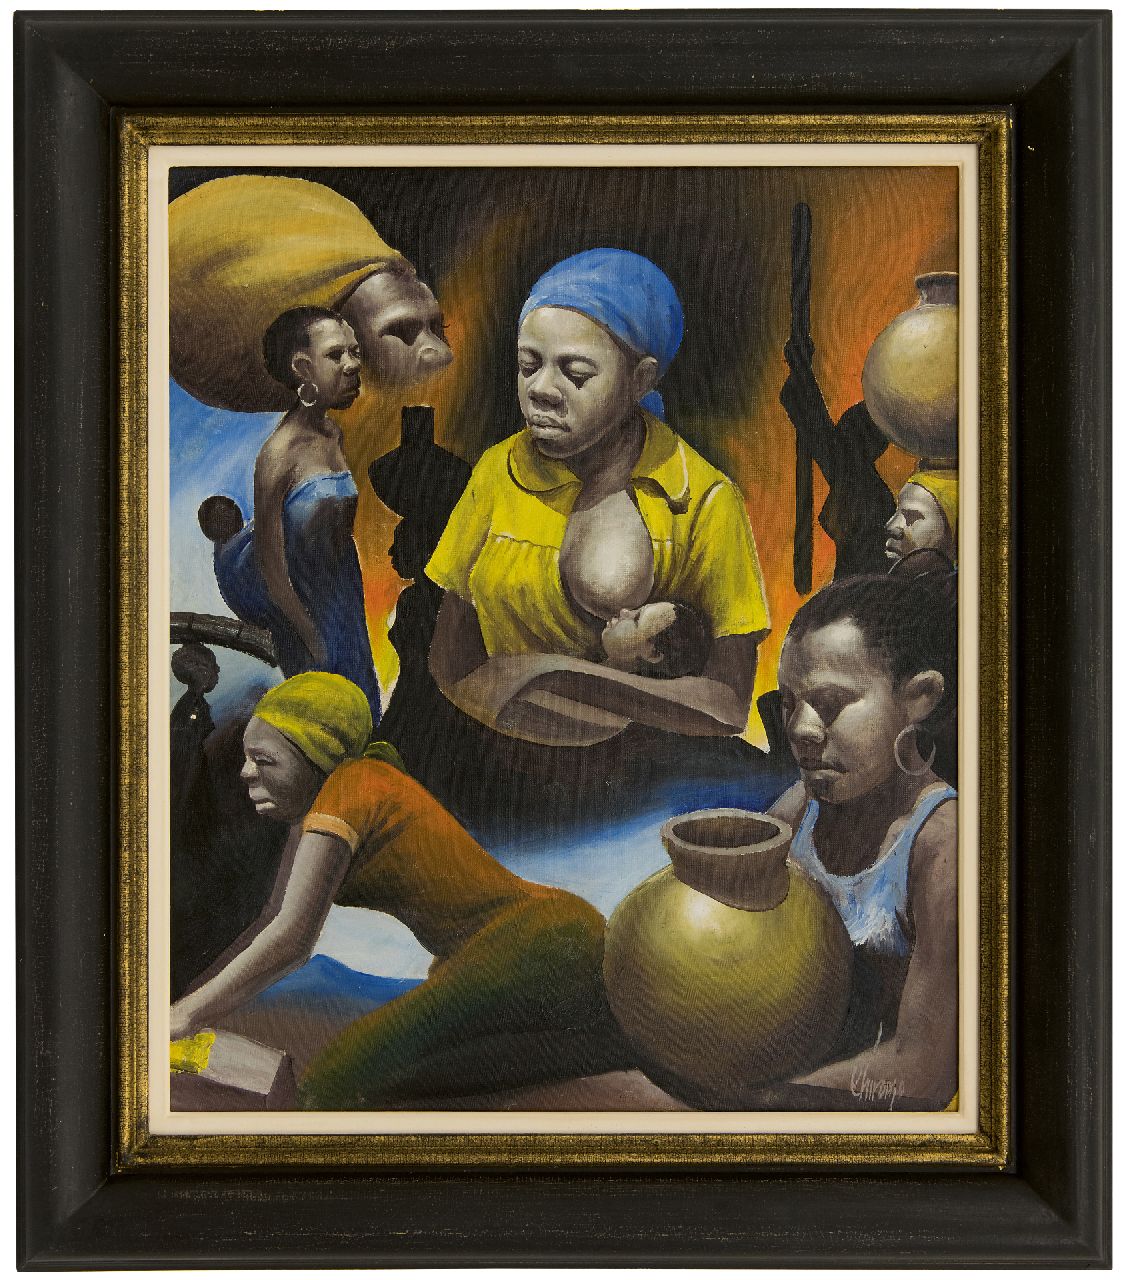 Chiromo K.  | Kay Chiromo | Paintings offered for sale | African women; verso: Portrait of a woman, oil on canvas 54.6 x 45.5 cm, signed l.r and on the reverse and dated '79 on the reverse